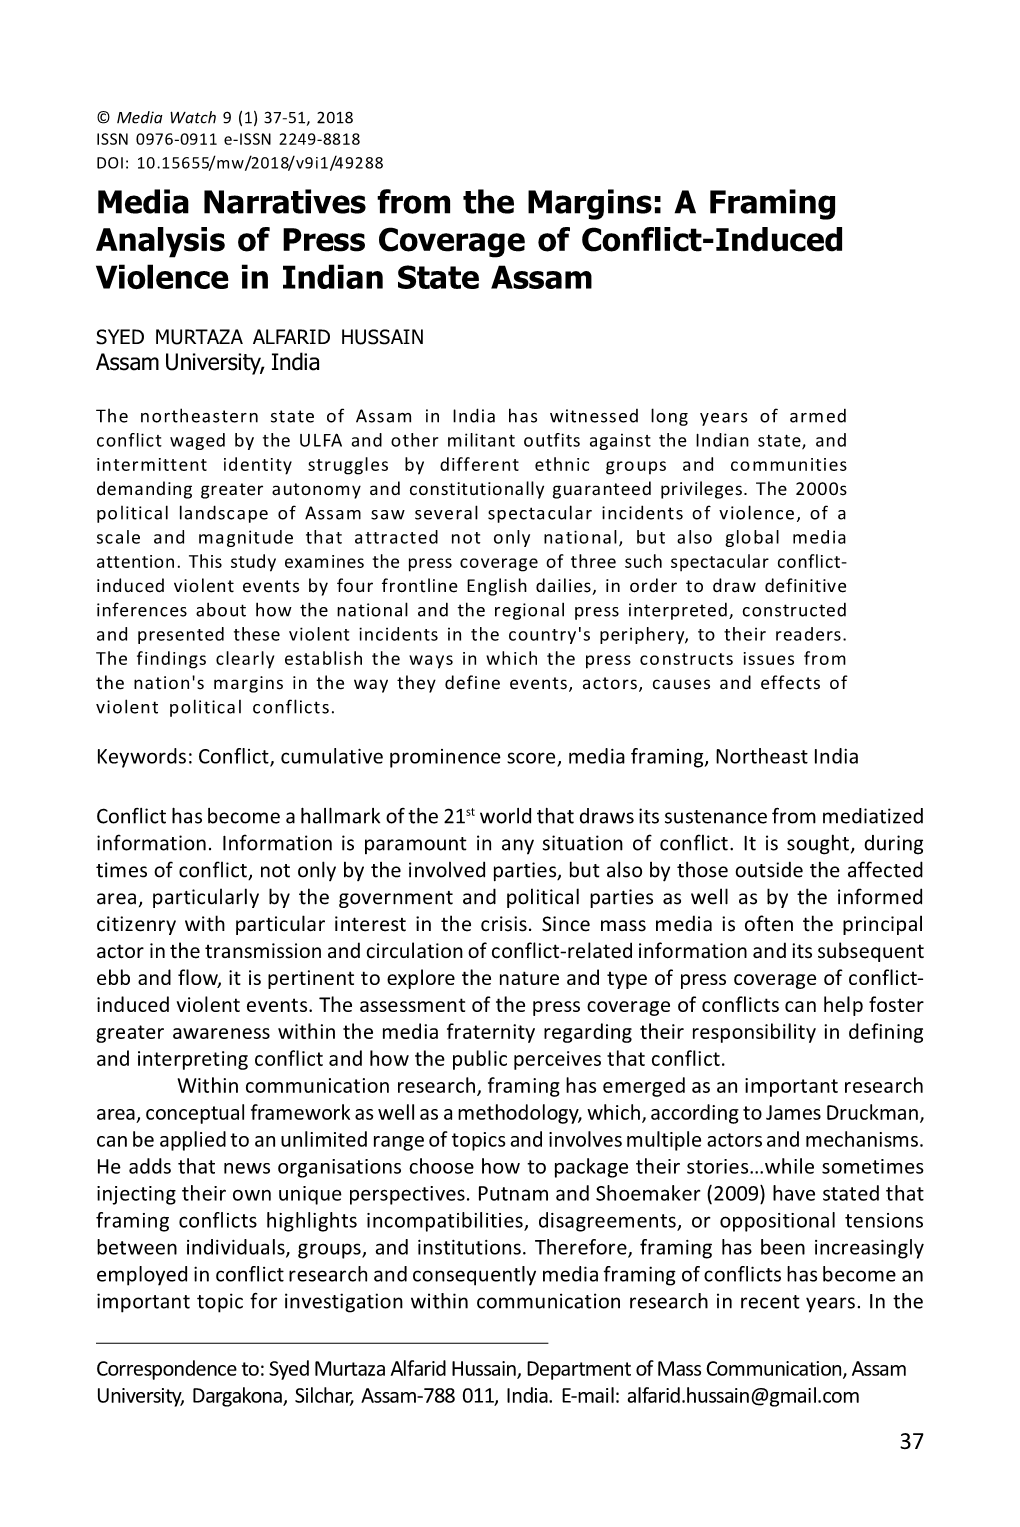 Media Narratives from the Margins: a Framing Analysis of Press Coverage of Conflict-Induced Violence in Indian State Assam